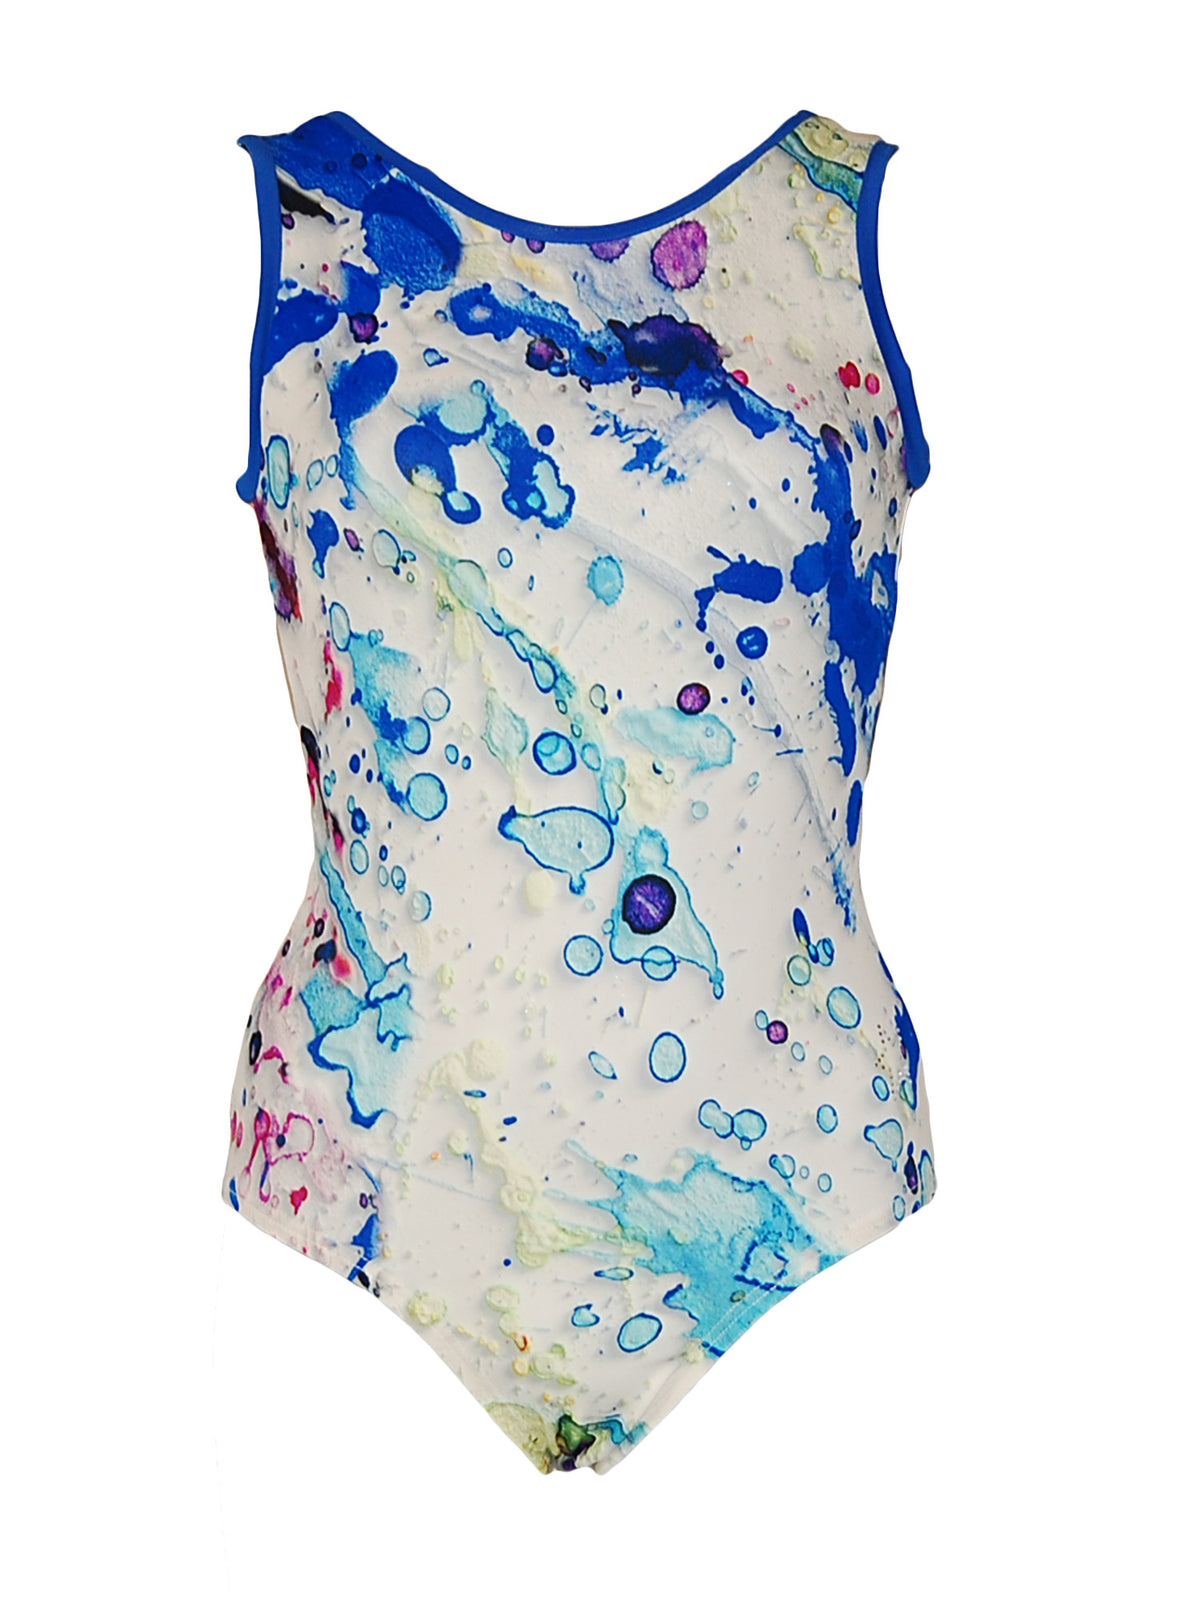 Front image of tank style leotard